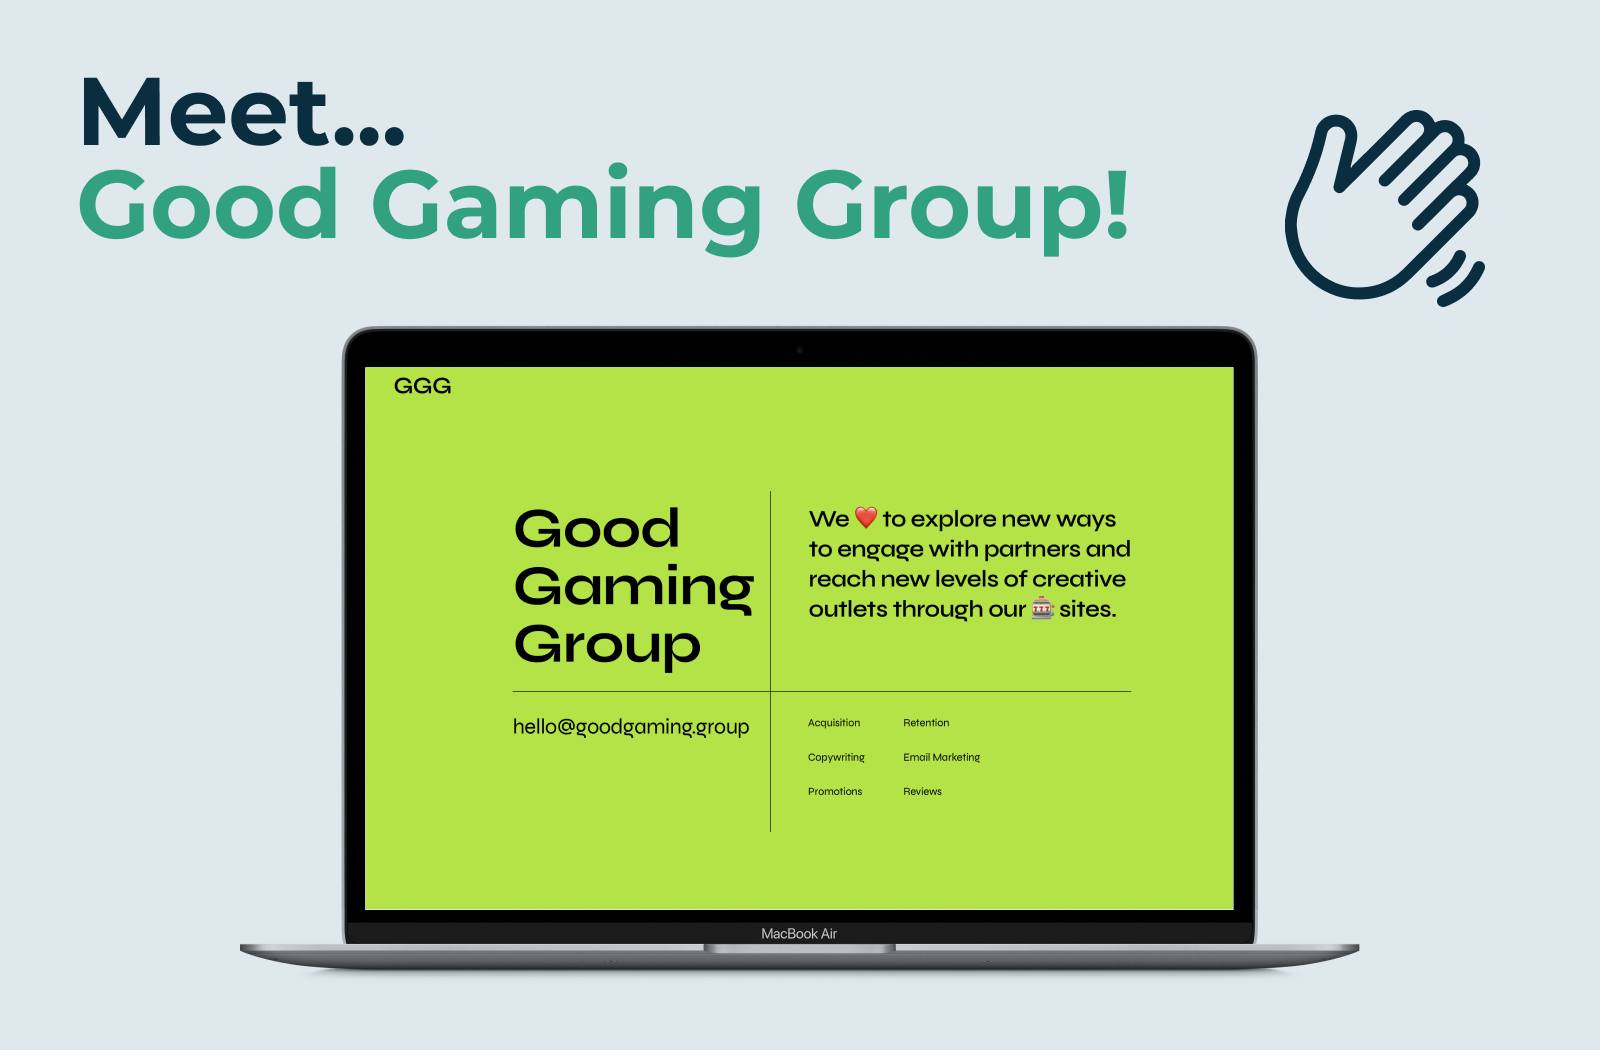 NEW INVESTMENT! Meet... Good Gaming Group!